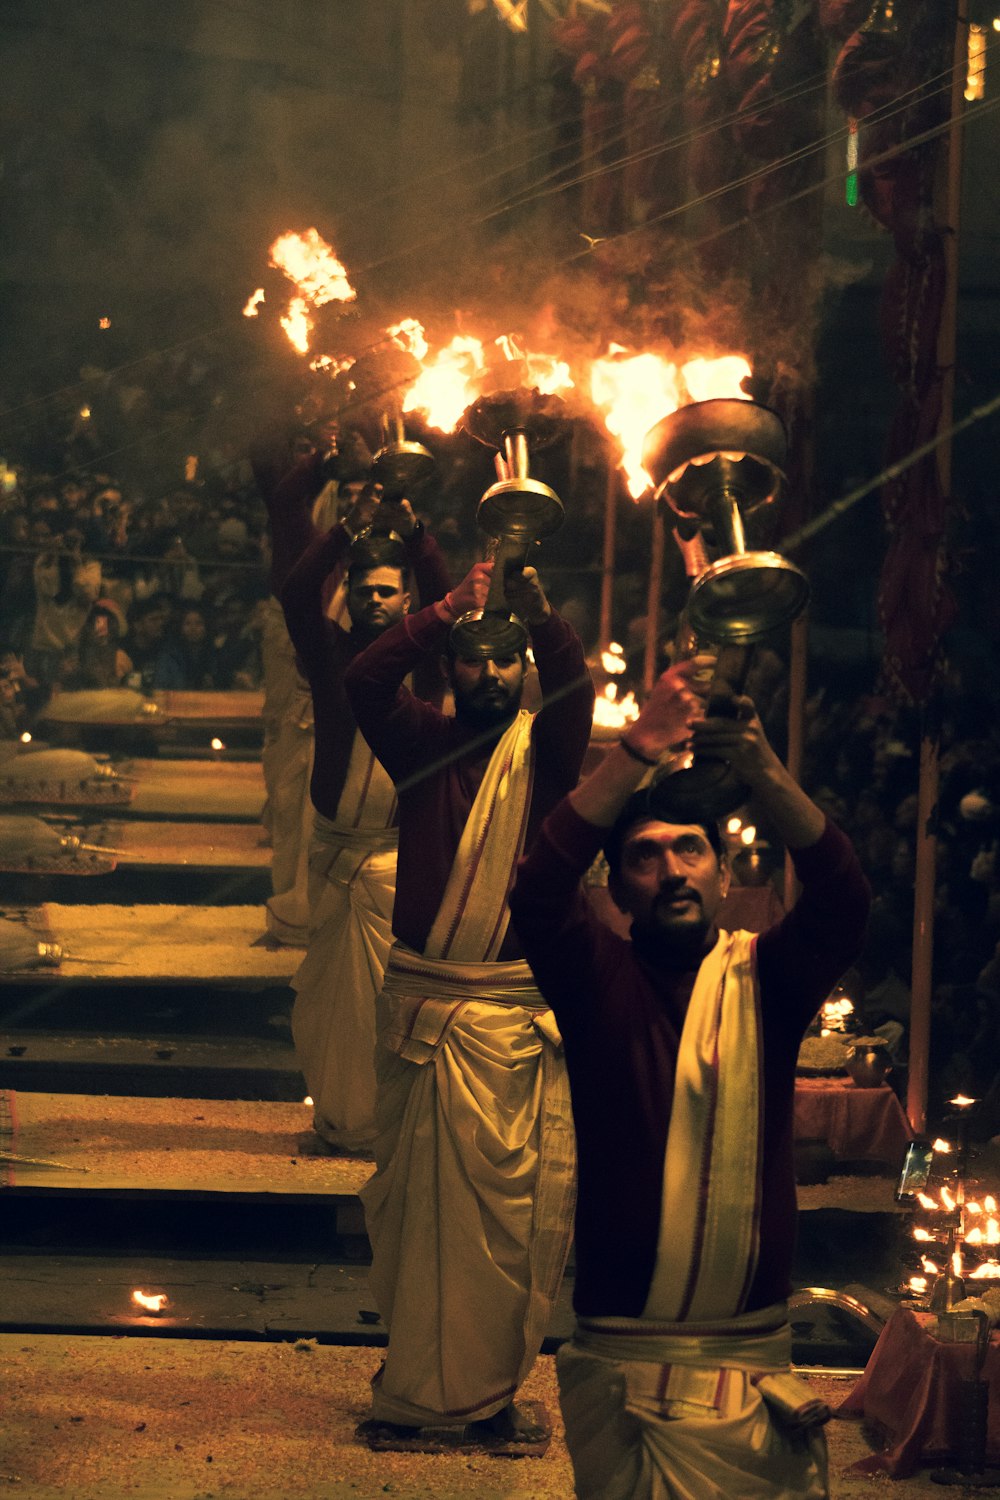 a group of men holding torches in their hands